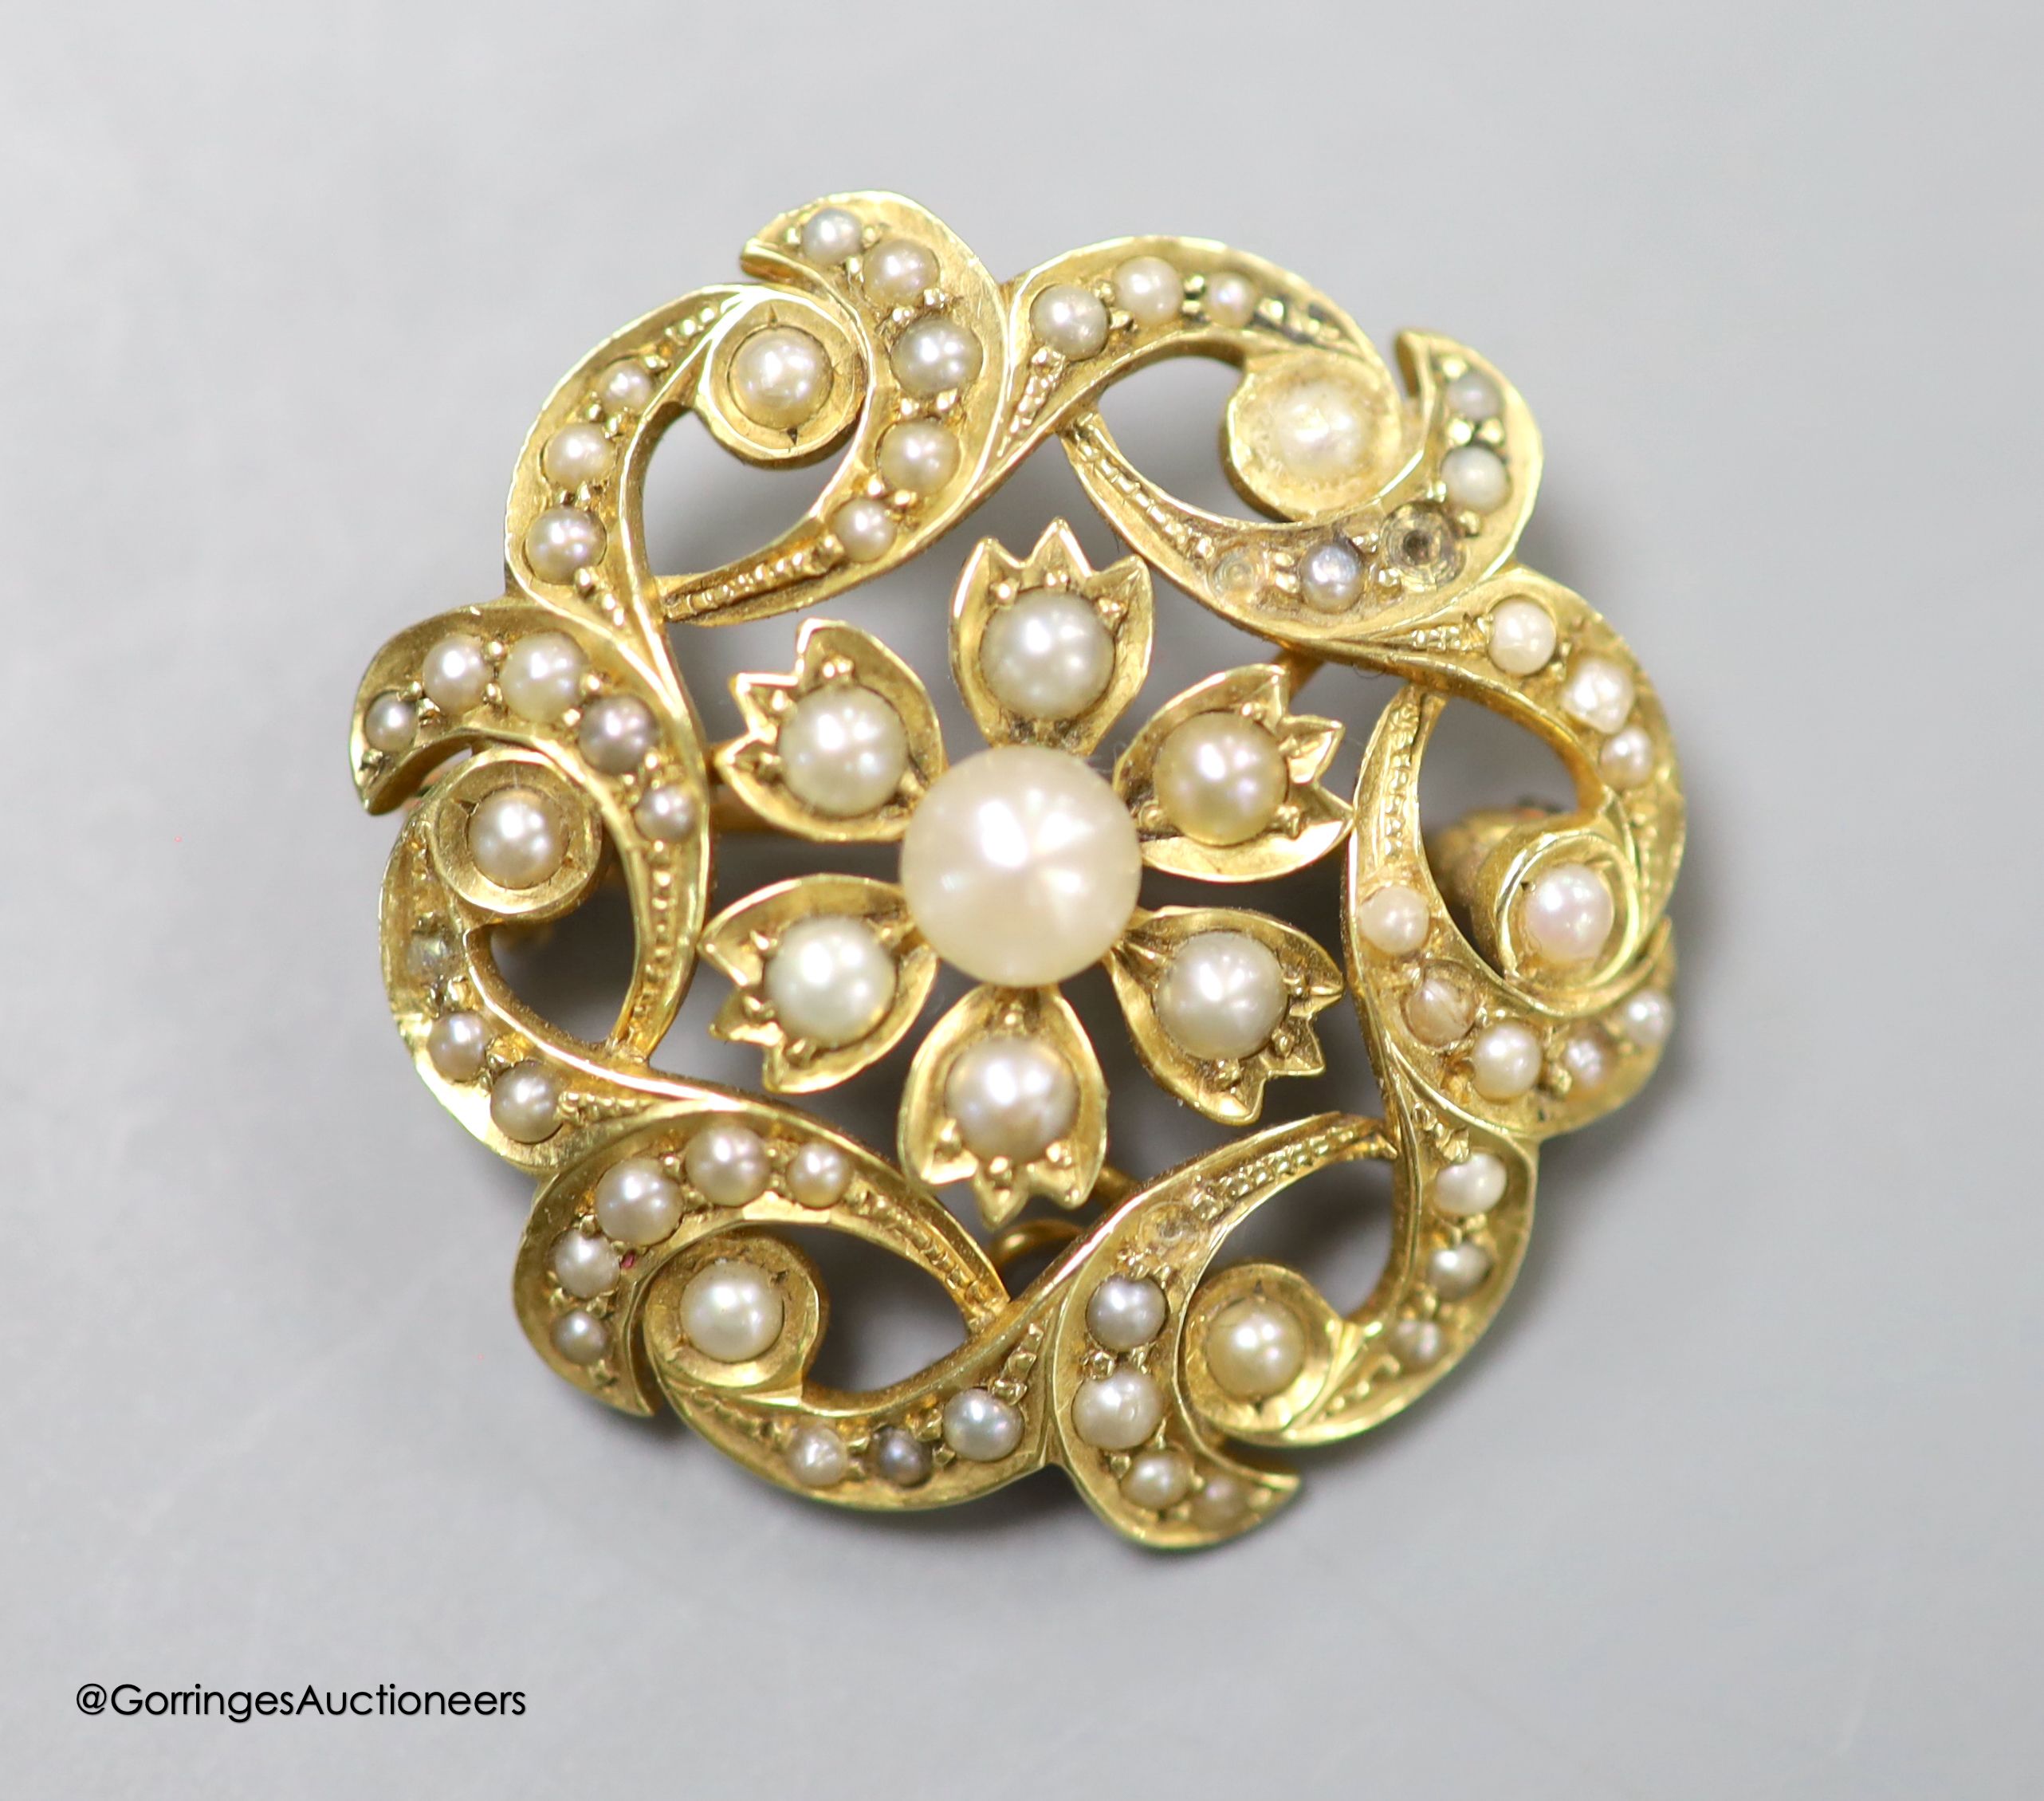 A late Victorian 15ct and seed pearl circular cluster pendant brooch, 25mm